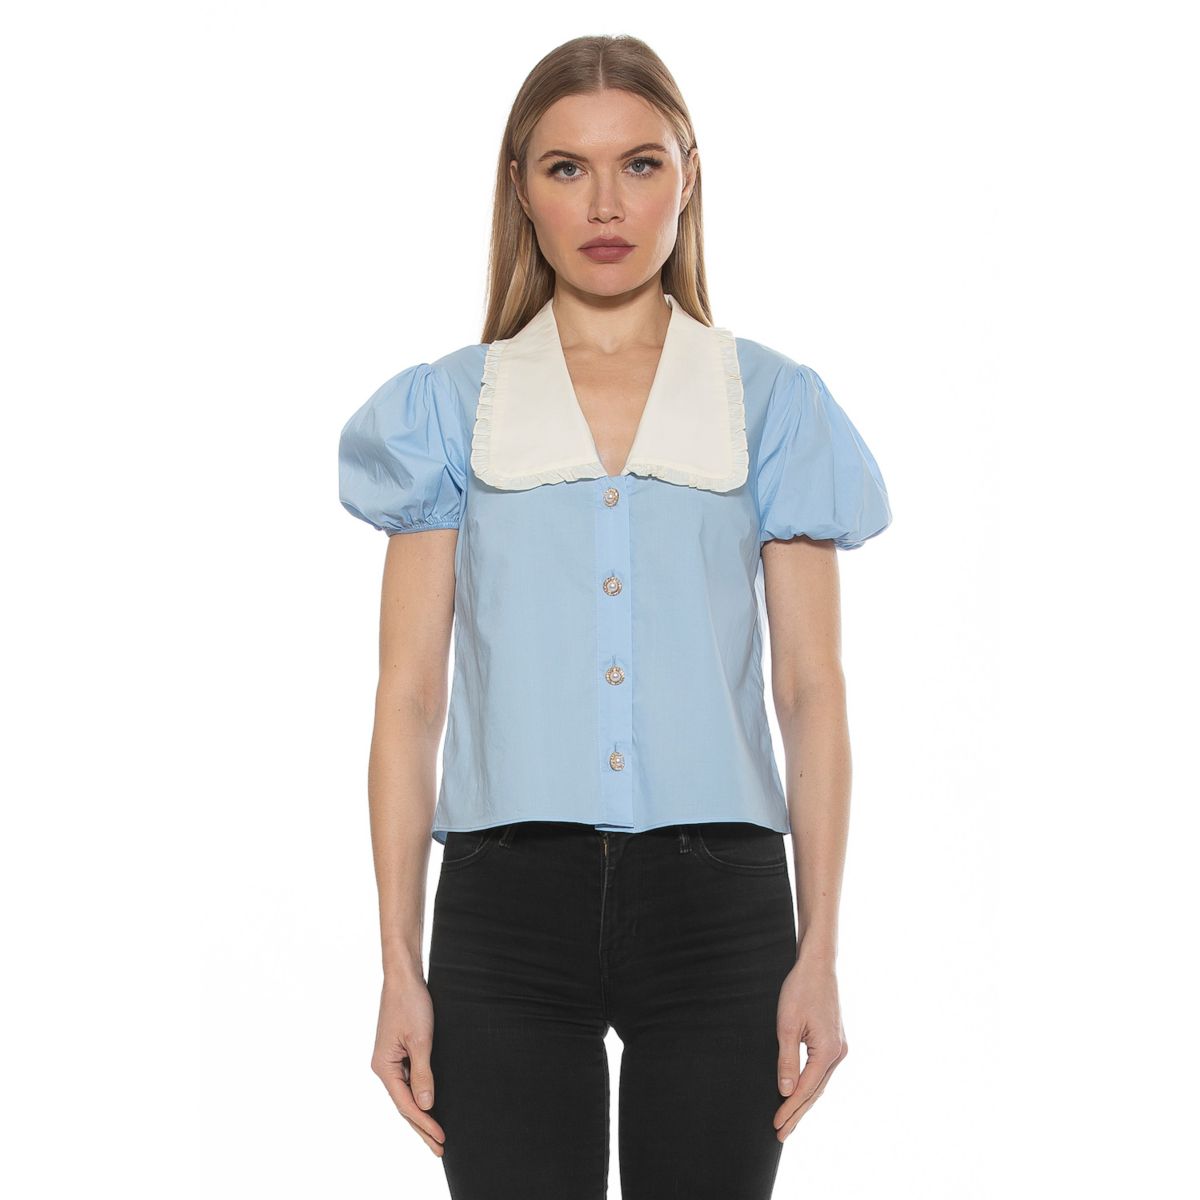 Women's ALEXIA ADMOR Sandra Short Sleeve Top with Embellished Button ALEXIA ADMOR